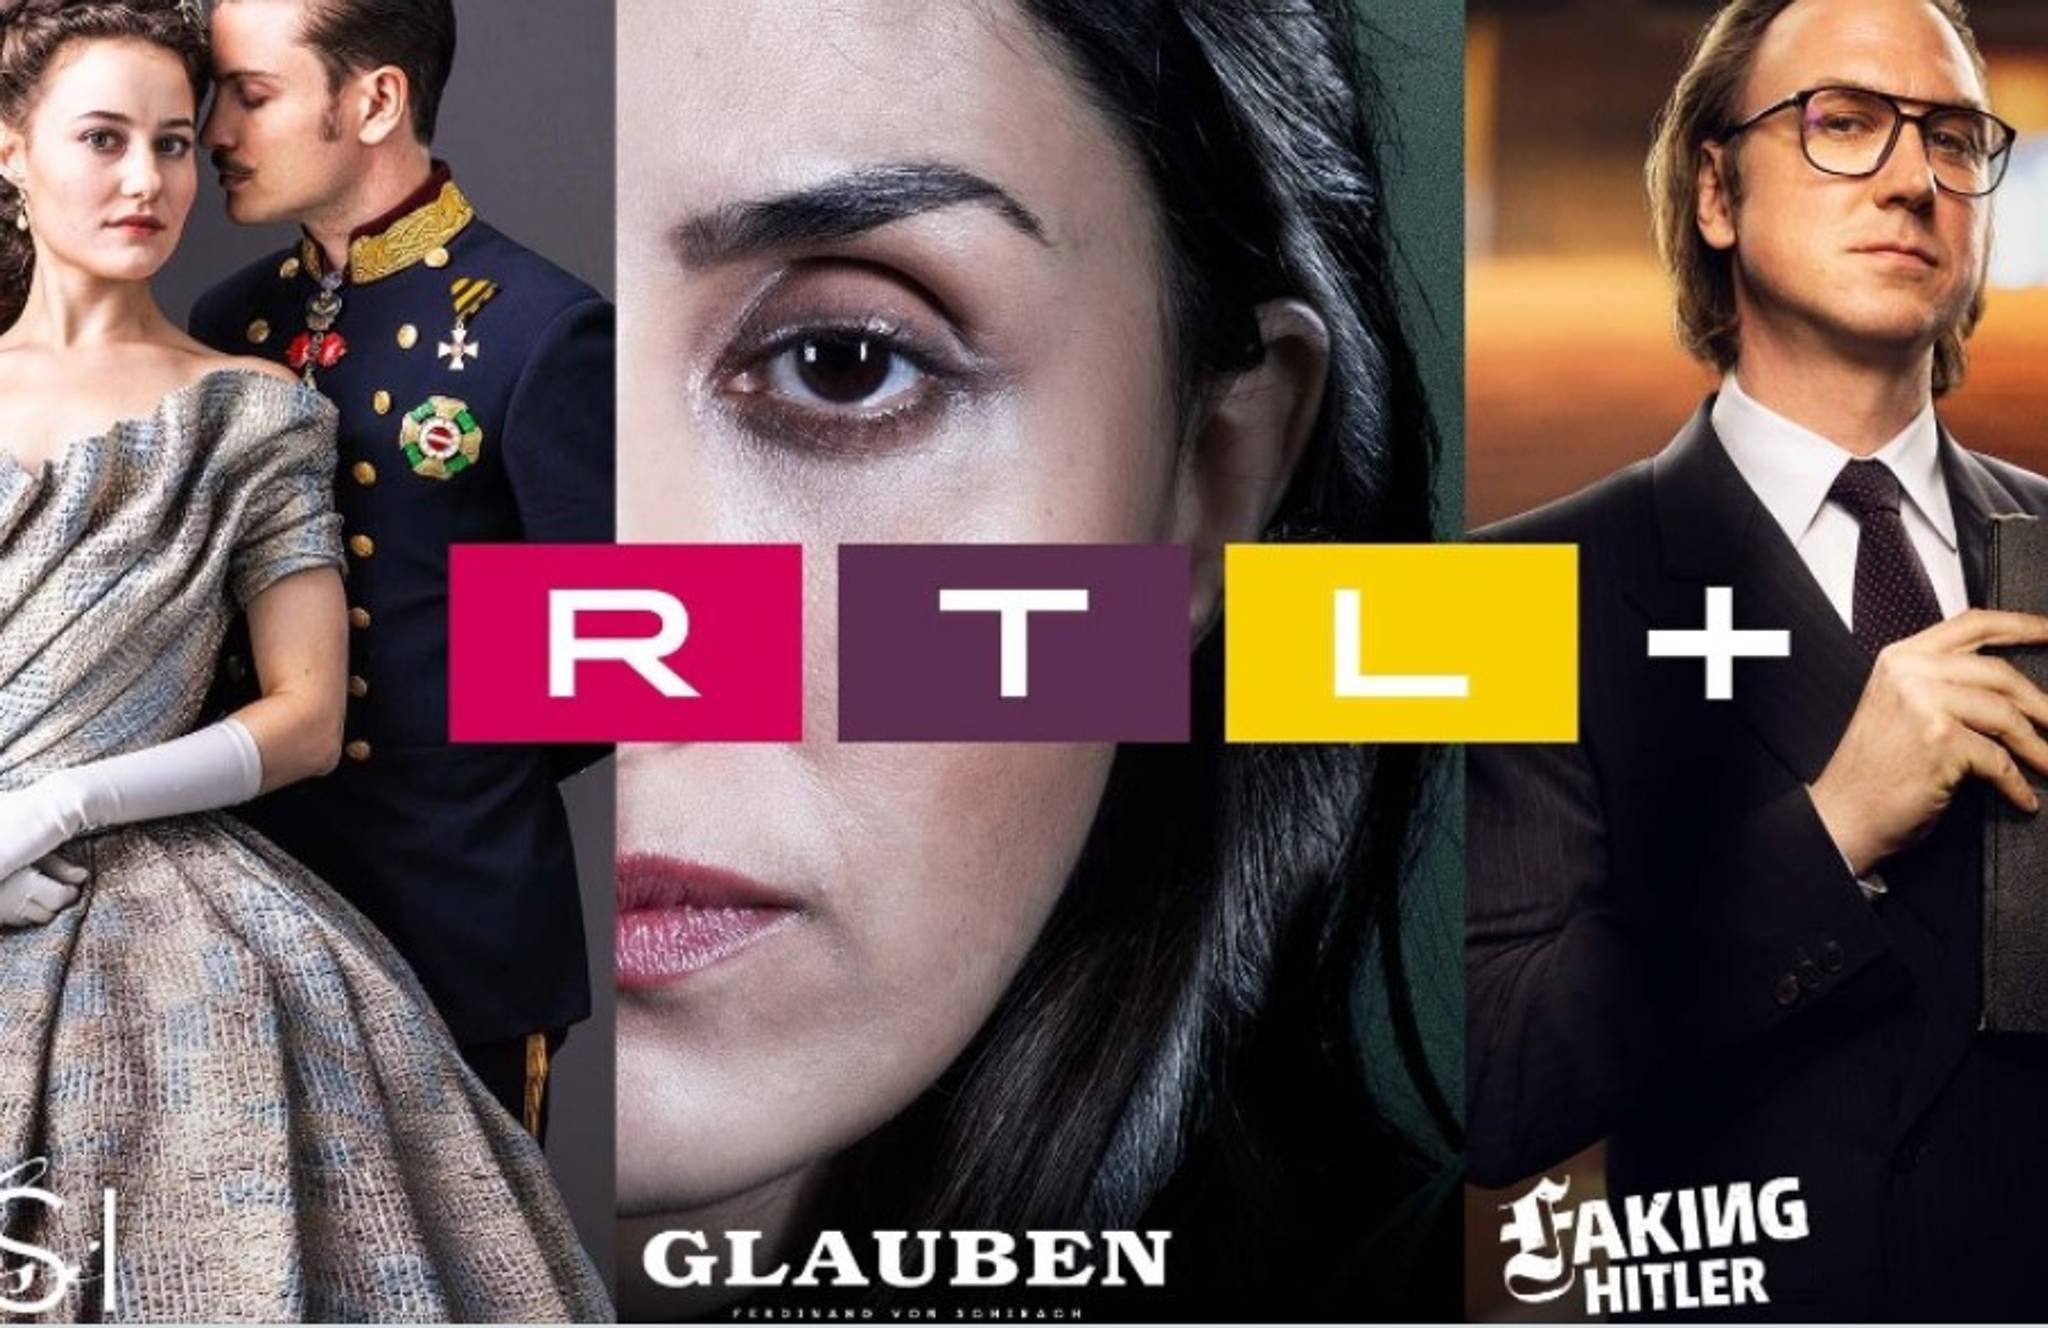 RTL streaming taps growing interest in local content